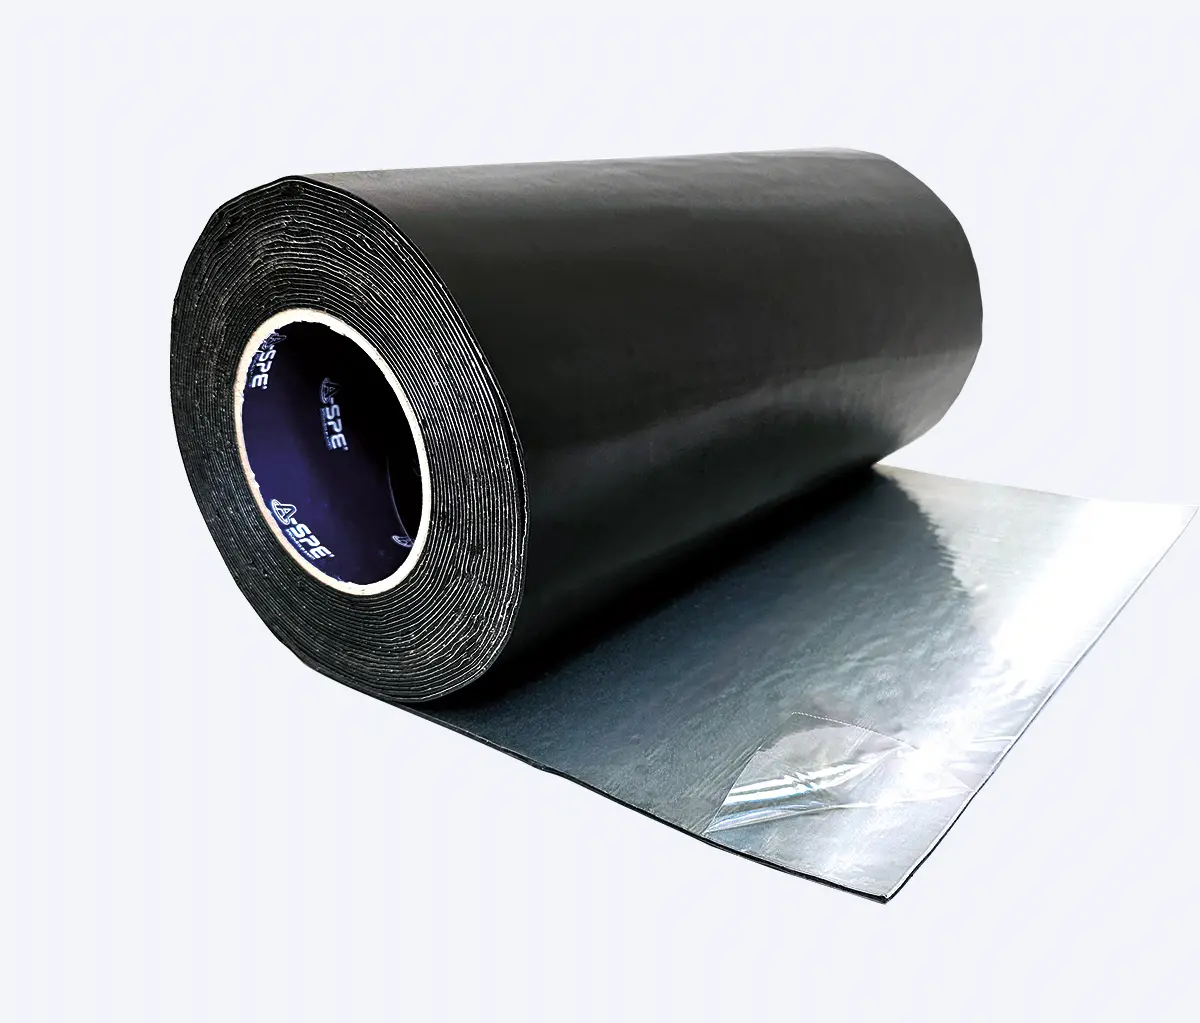 black and silver anticorrosion tape based on a double active passive protection barrier on roll